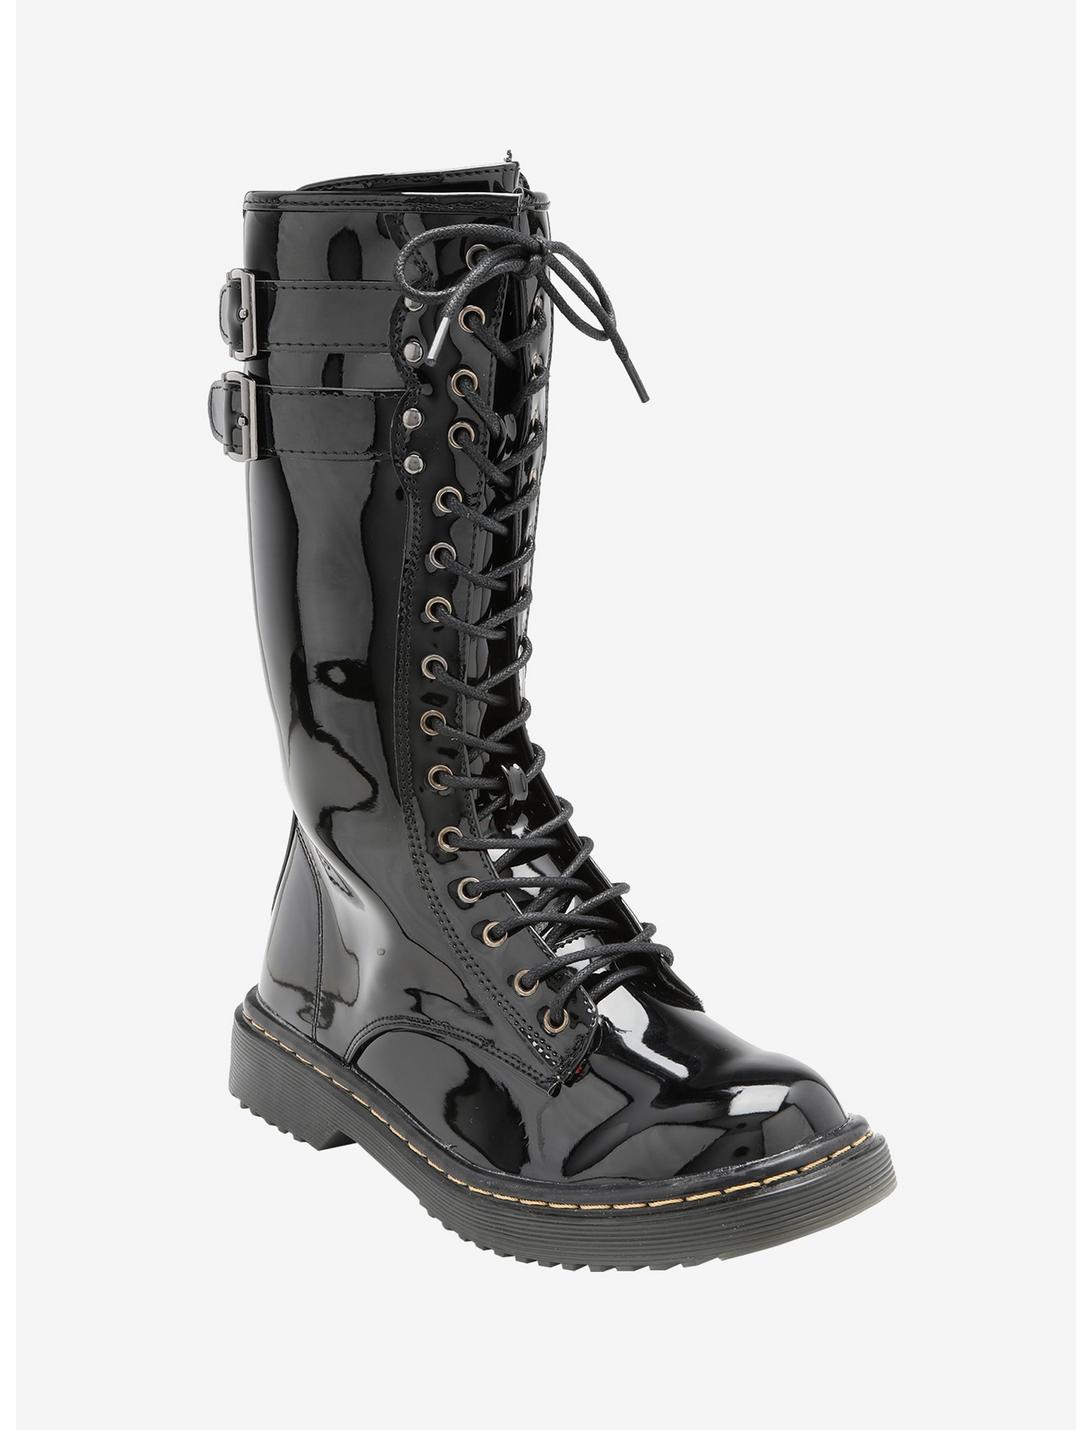 Double Buckle Shiny PU Tall Combat Boots, BLACK, hi-res